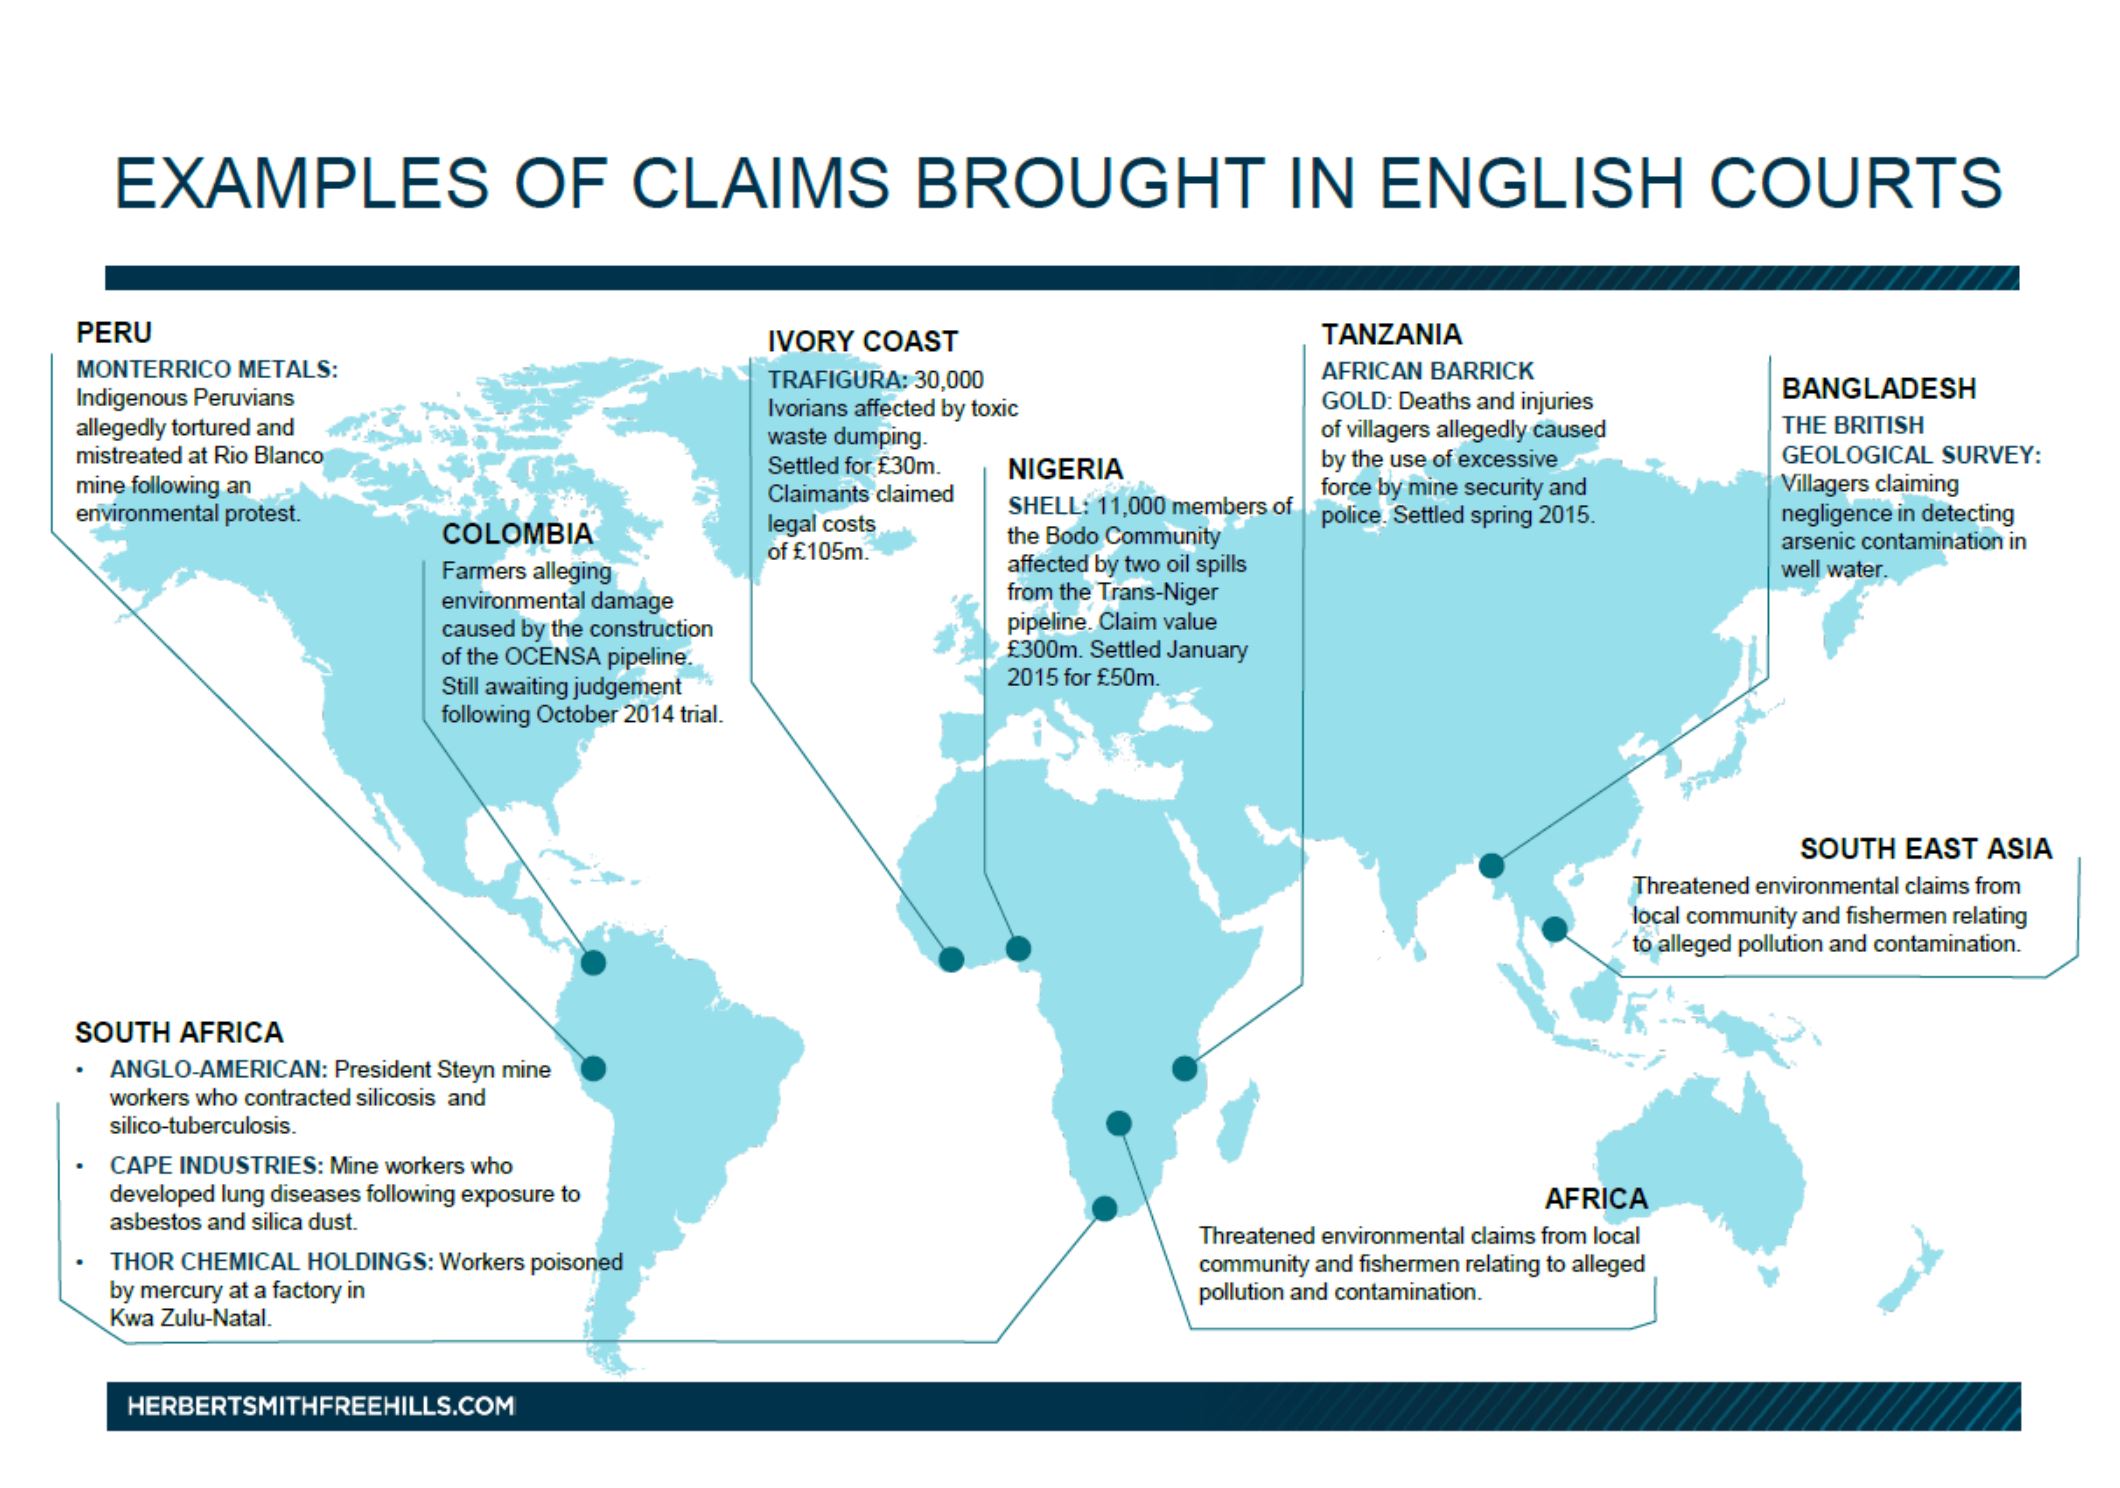 Examples of claims